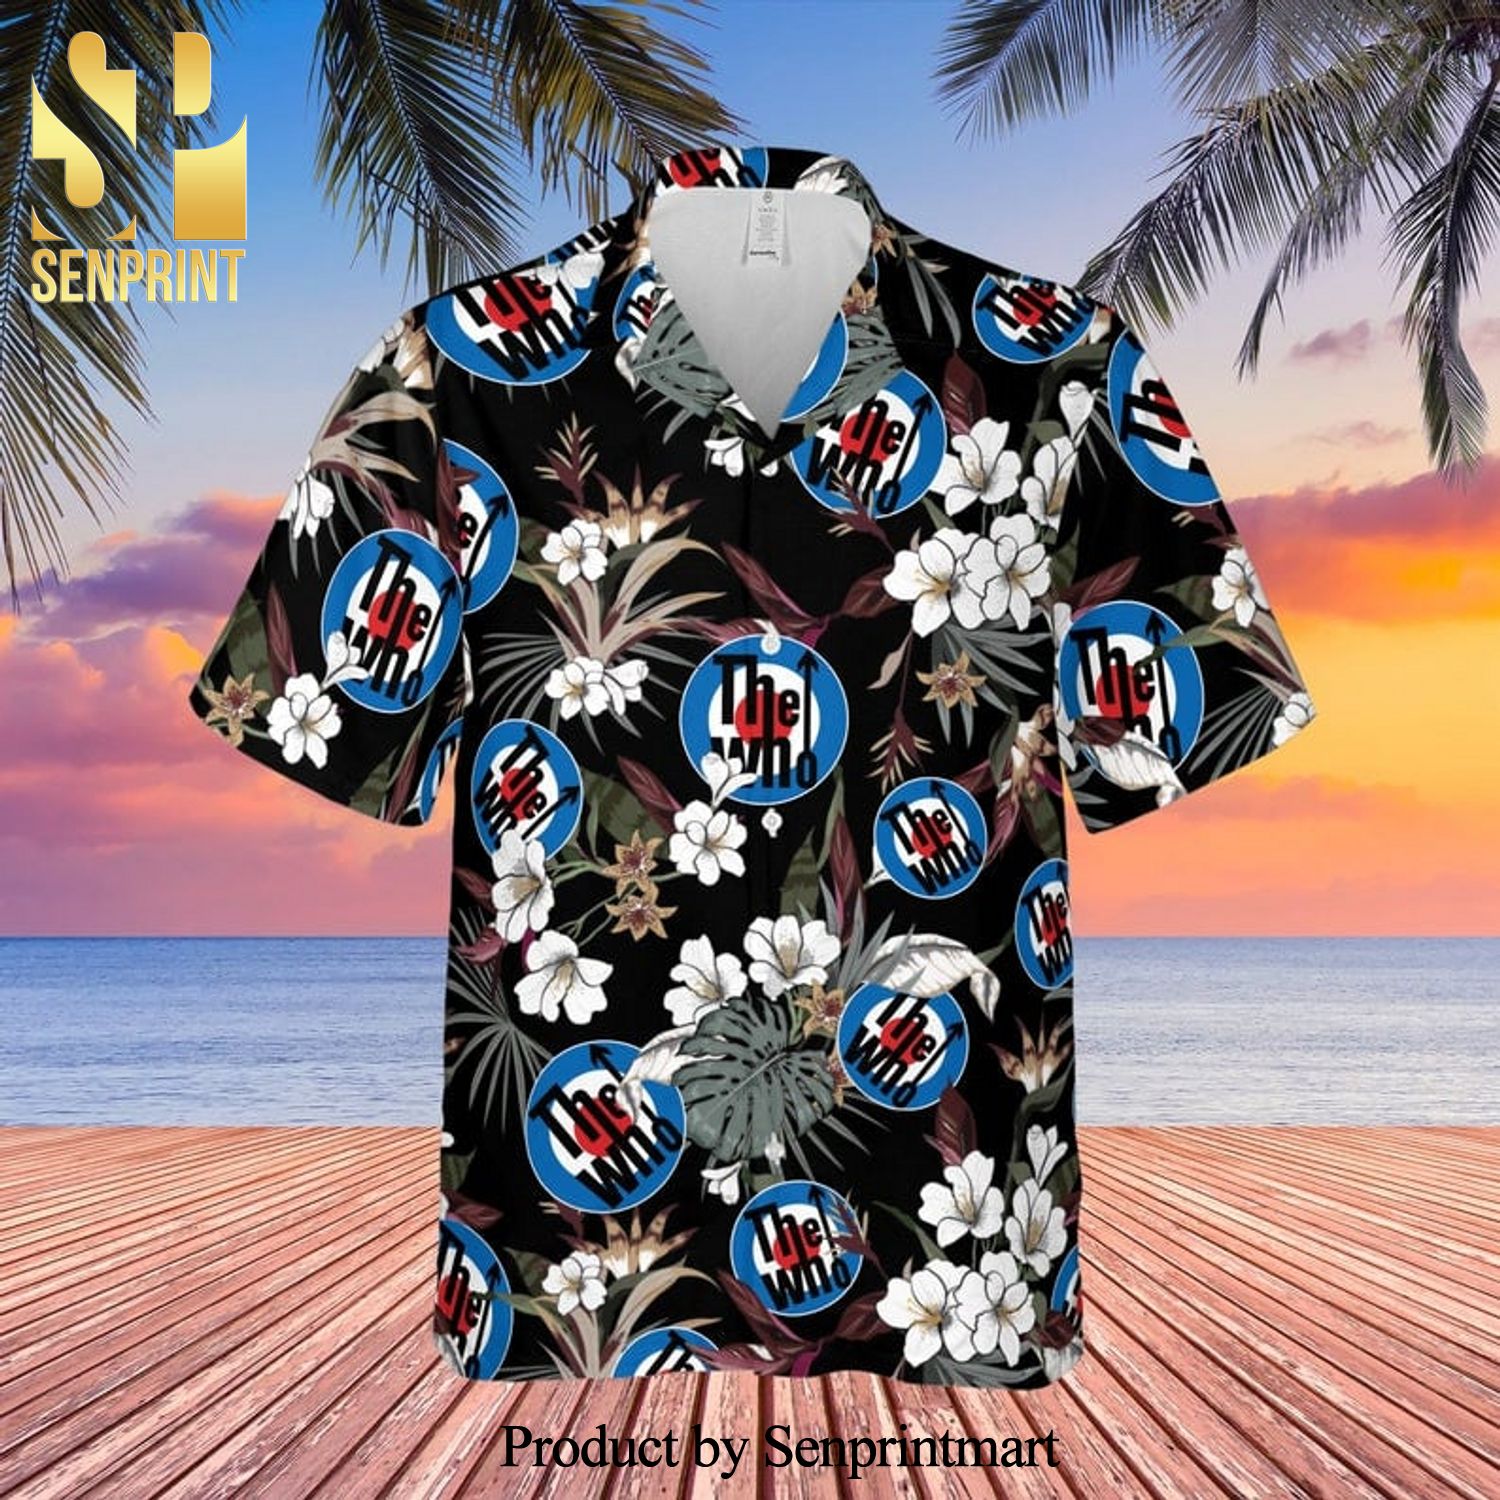 The Who Rock Band And Tropical Forest Full Printing Hawaiian Shirt – Black